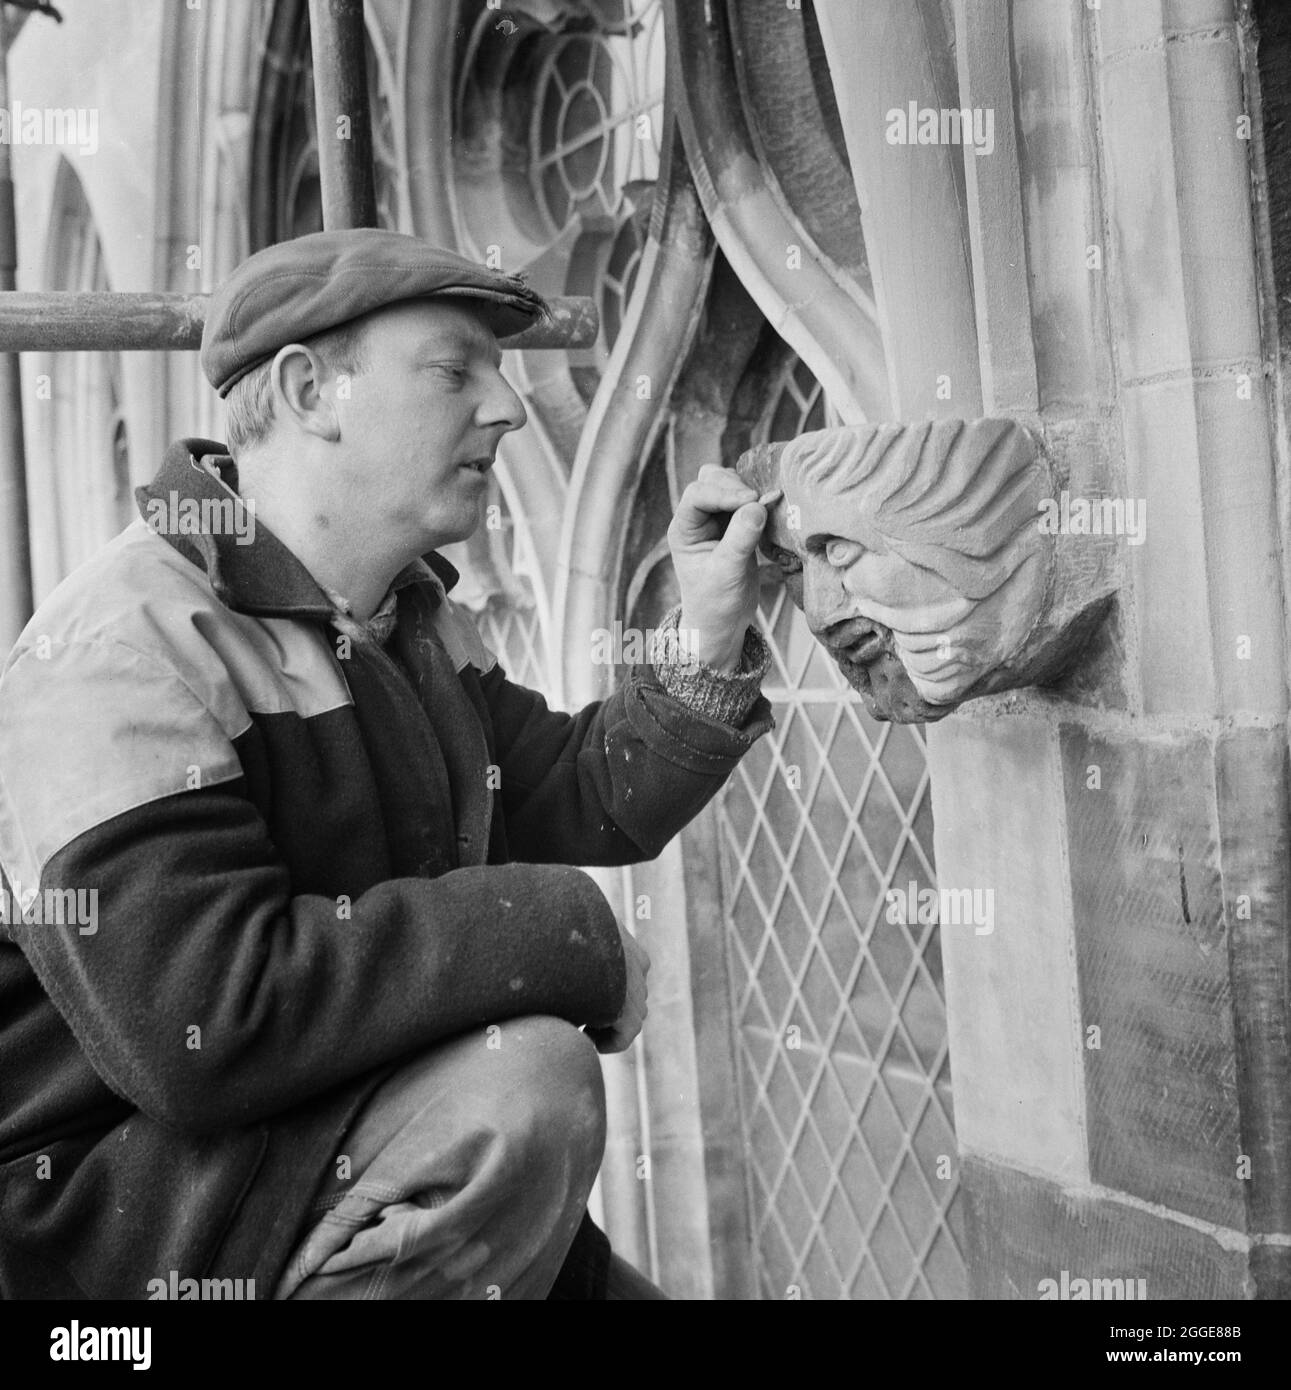 Foreman stonemason, Ted Drinkwater, working at Carlisle Cathedral checking a stone head on the north face of the cathedral. Half its face had been replaced using SBD Certite as the adhesive. This photograph is part of a batch taken by Laing to show restoration work being carried out using SBD Certite. In 1961, N M Phillips, the architect for Carlisle Cathedral started experimenting with the bonding material SBD Certite in the restoration of the cathedral. It was used on all but one of the decorated Gothic windows of the South Clerestory and by the time this photograph was taken, it was being u Stock Photo